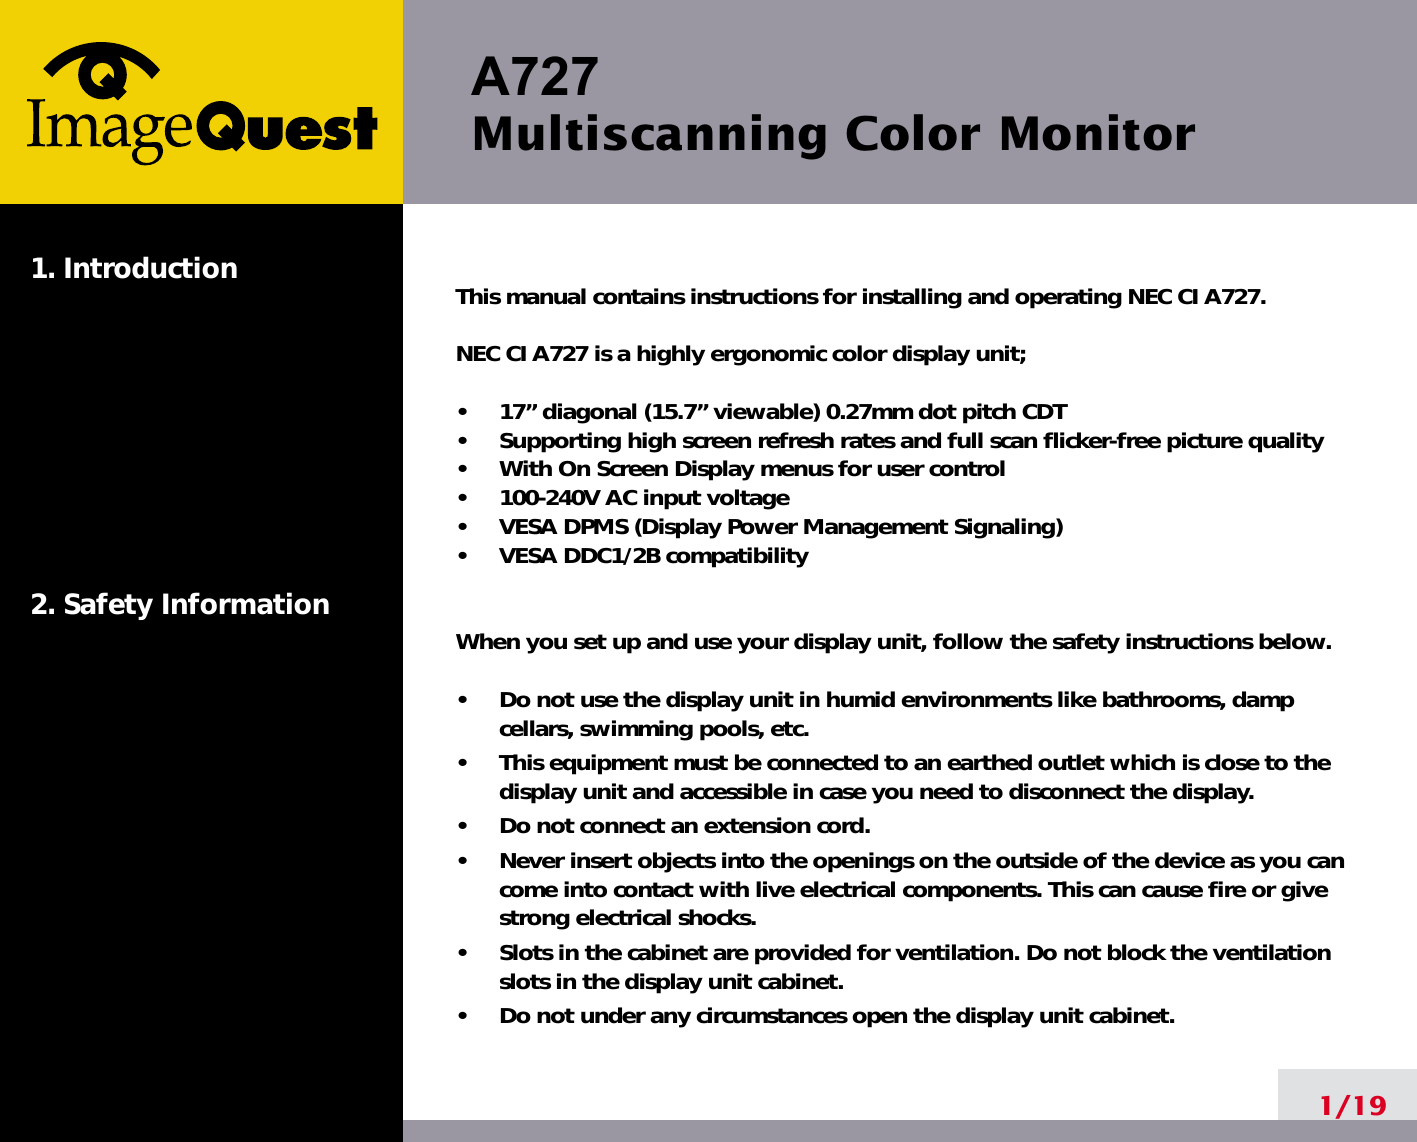 A727 Multiscanning Color Monitor1/191. Introduction2. Safety InformationThis manual contains instructions for installing and operating NEC CI A727.NEC CI A727 is a highly ergonomic color display unit; •     17” diagonal (15.7” viewable) 0.27mm dot pitch CDT•     Supporting high screen refresh rates and full scan flicker-free picture quality•     With On Screen Display menus for user control•     100-240V AC input voltage•     VESA DPMS (Display Power Management Signaling)•     VESA DDC1/2B compatibilityWhen you set up and use your display unit, follow the safety instructions below.•     Do not use the display unit in humid environments like bathrooms, dampcellars, swimming pools, etc.•     This equipment must be connected to an earthed outlet which is close to thedisplay unit and accessible in case you need to disconnect the display.•     Do not connect an extension cord.•     Never insert objects into the openings on the outside of the device as you cancome into contact with live electrical components. This can cause fire or givestrong electrical shocks.•     Slots in the cabinet are provided for ventilation. Do not block the ventilationslots in the display unit cabinet.•     Do not under any circumstances open the display unit cabinet.